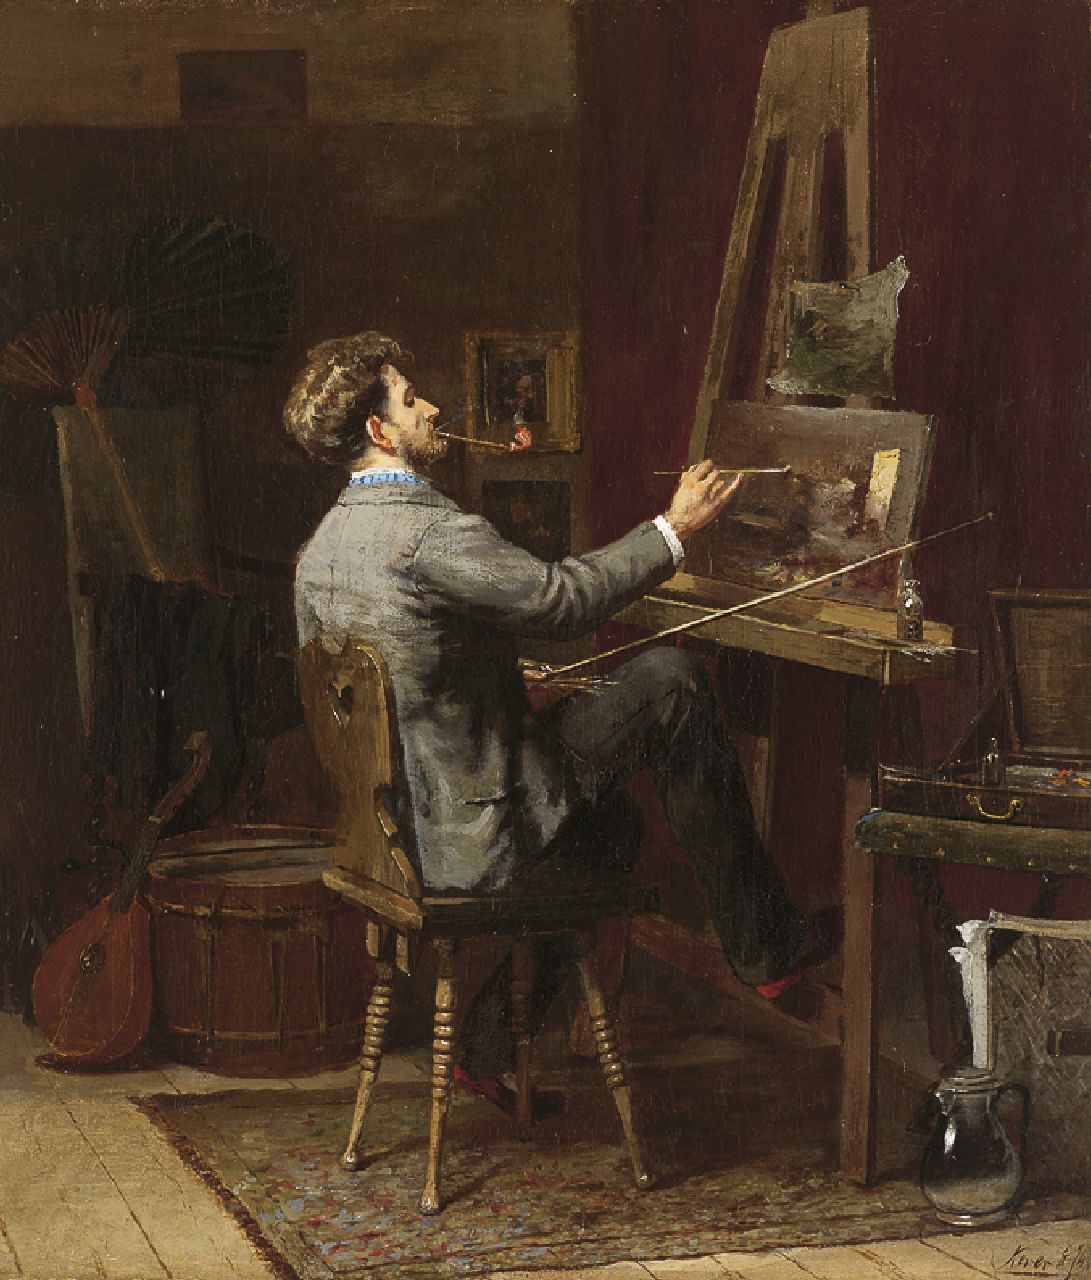 Kever J.S.H.  | Jacob Simon Hendrik 'Hein' Kever, Artist in his studio, oil on canvas 42.7 x 37.0 cm, signed l.r. and dated '74